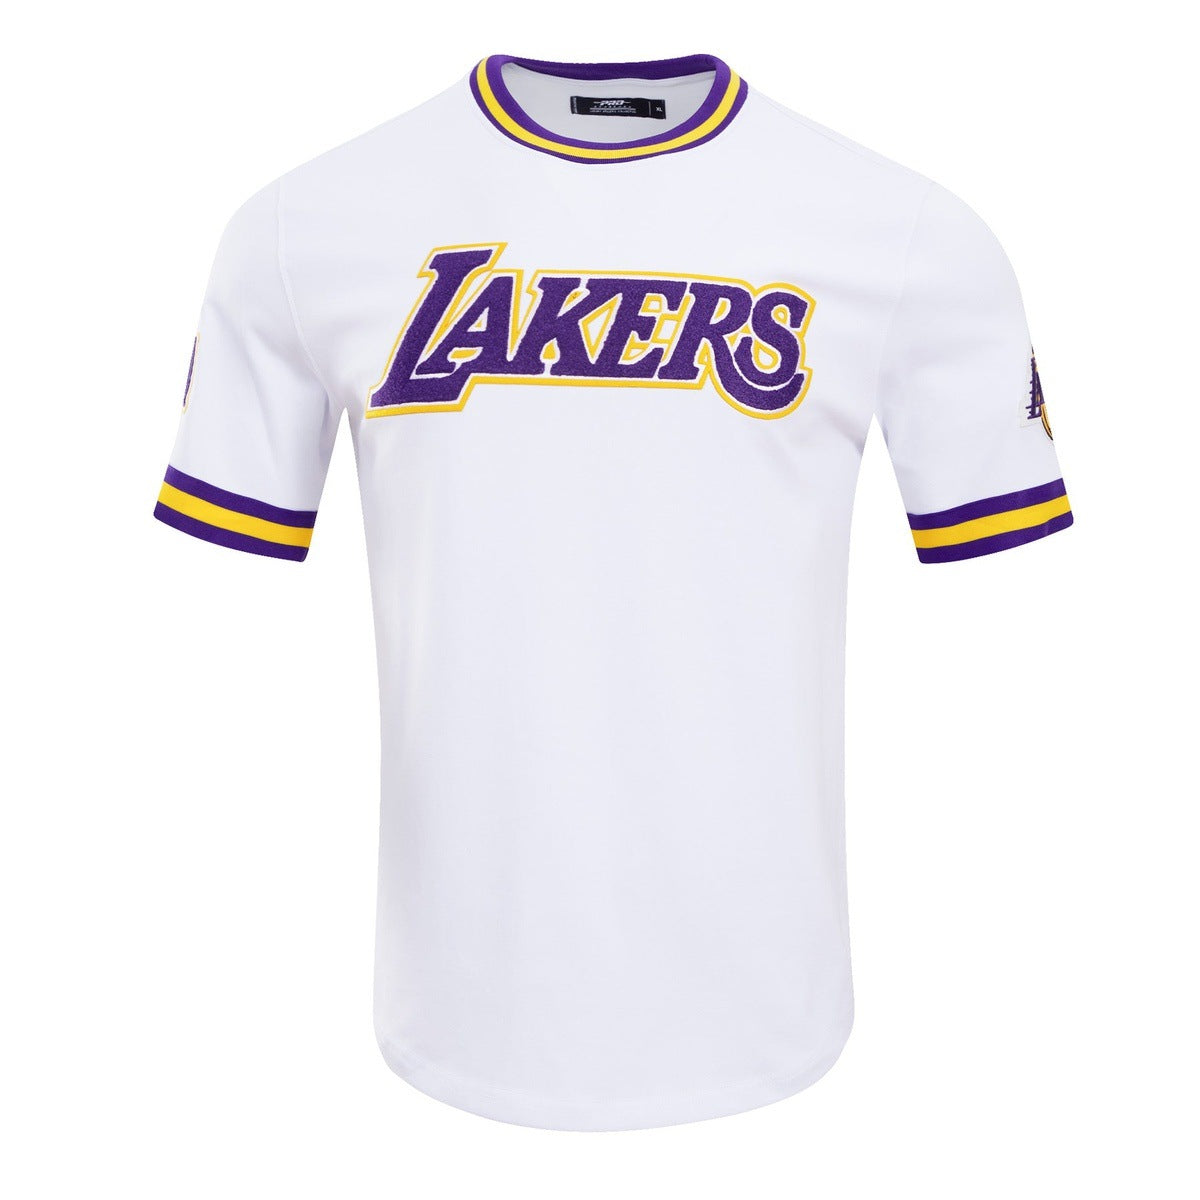 Pro Standard Los Angeles Lakers Joggers – Unleashed Streetwear and